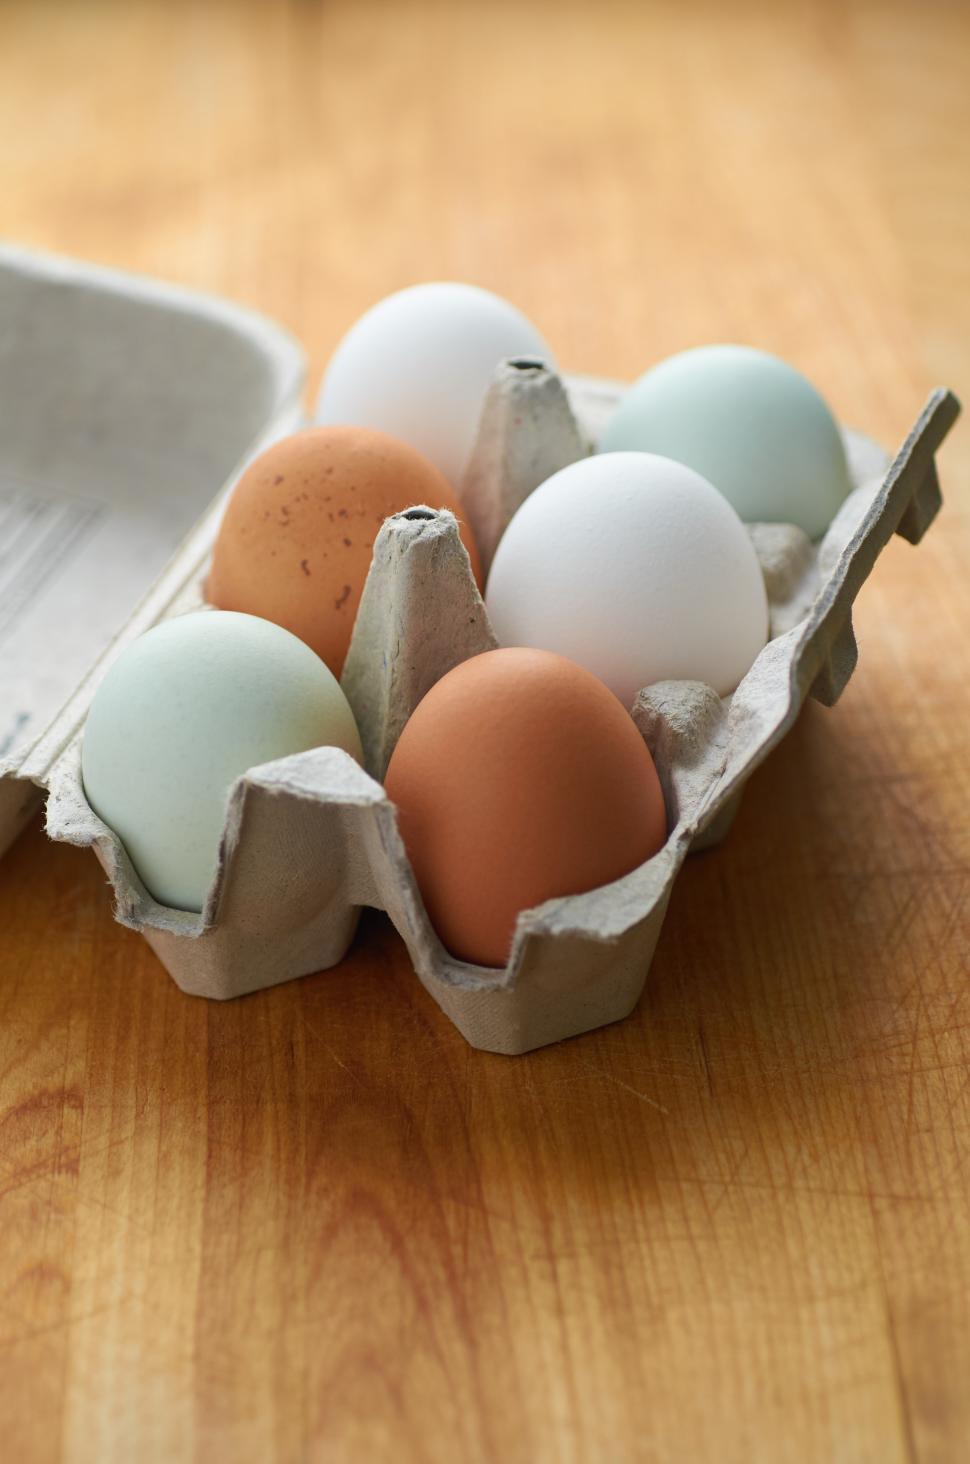 Free Image of A carton of eggs on a table 